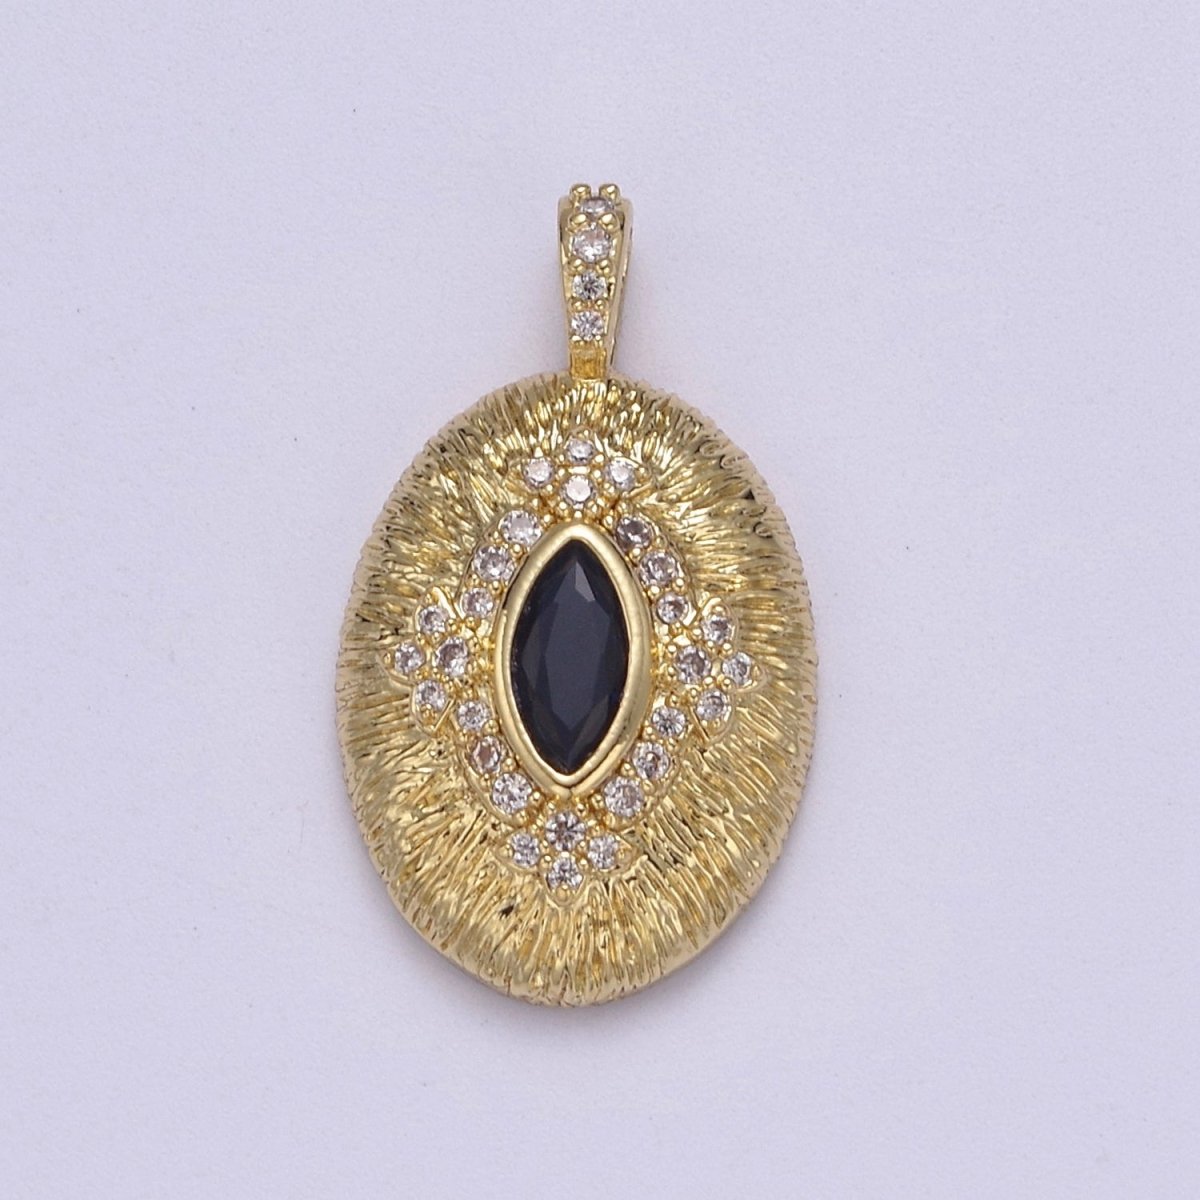 Gold Oval Eye Charm 24k Gold Filled with Blue CZ Eye Oval Medallion Pendant DIY Jewelry Making Supplies J-346 - DLUXCA